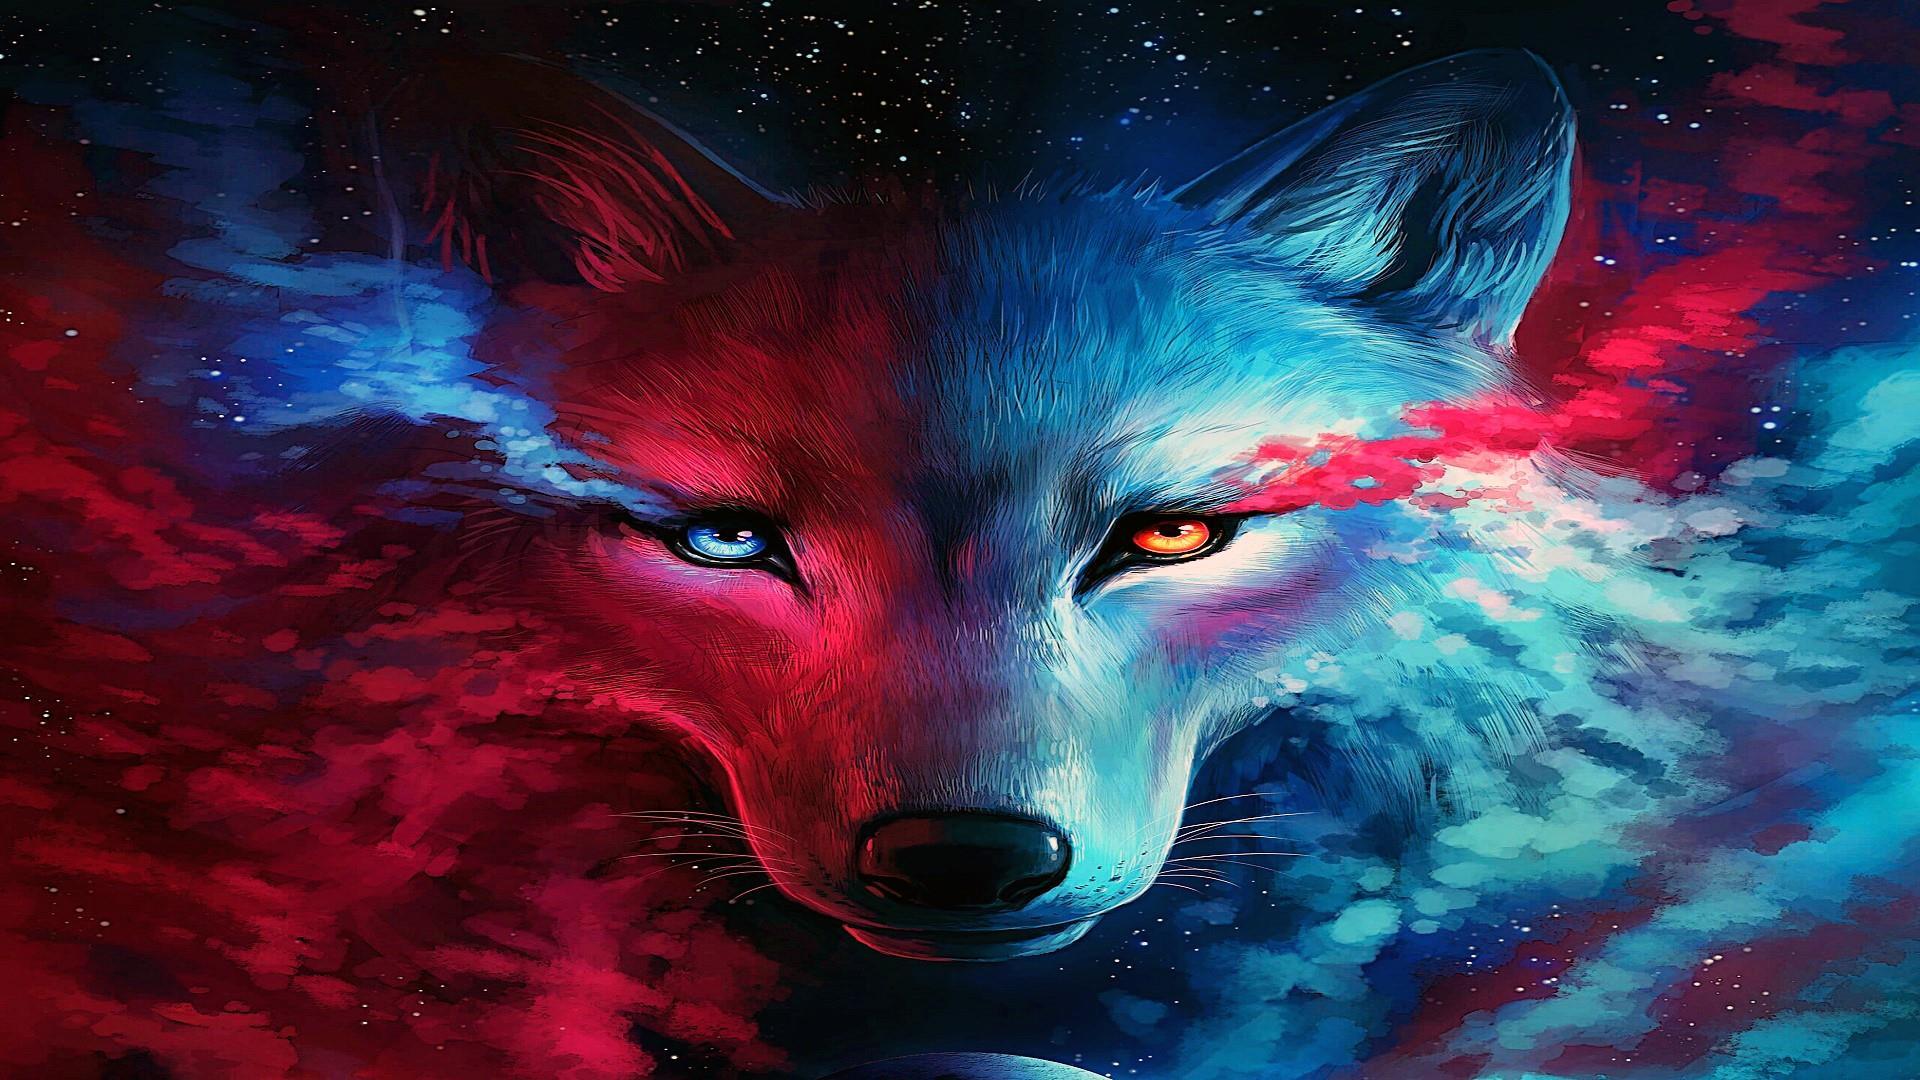 Galaxy Wolf Wallpapers Wallpaper Cave Windows 10 windows 8.1 windows 7 weitere. galaxy wolf wallpapers wallpaper cave